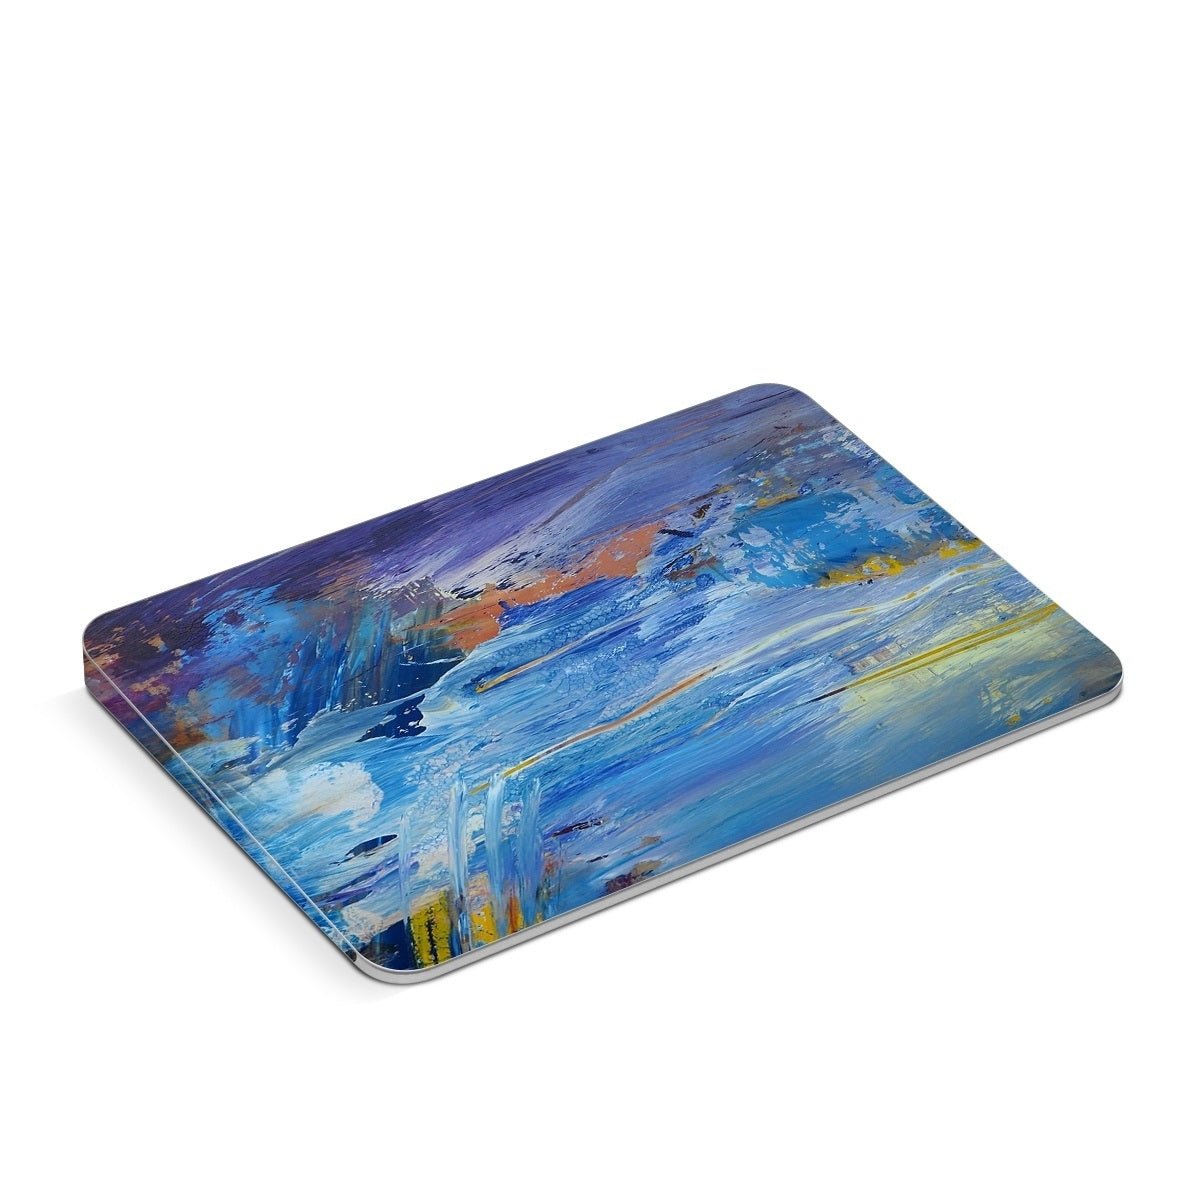 Abyss - Apple Magic Trackpad Skin - Creative by Nature - DecalGirl